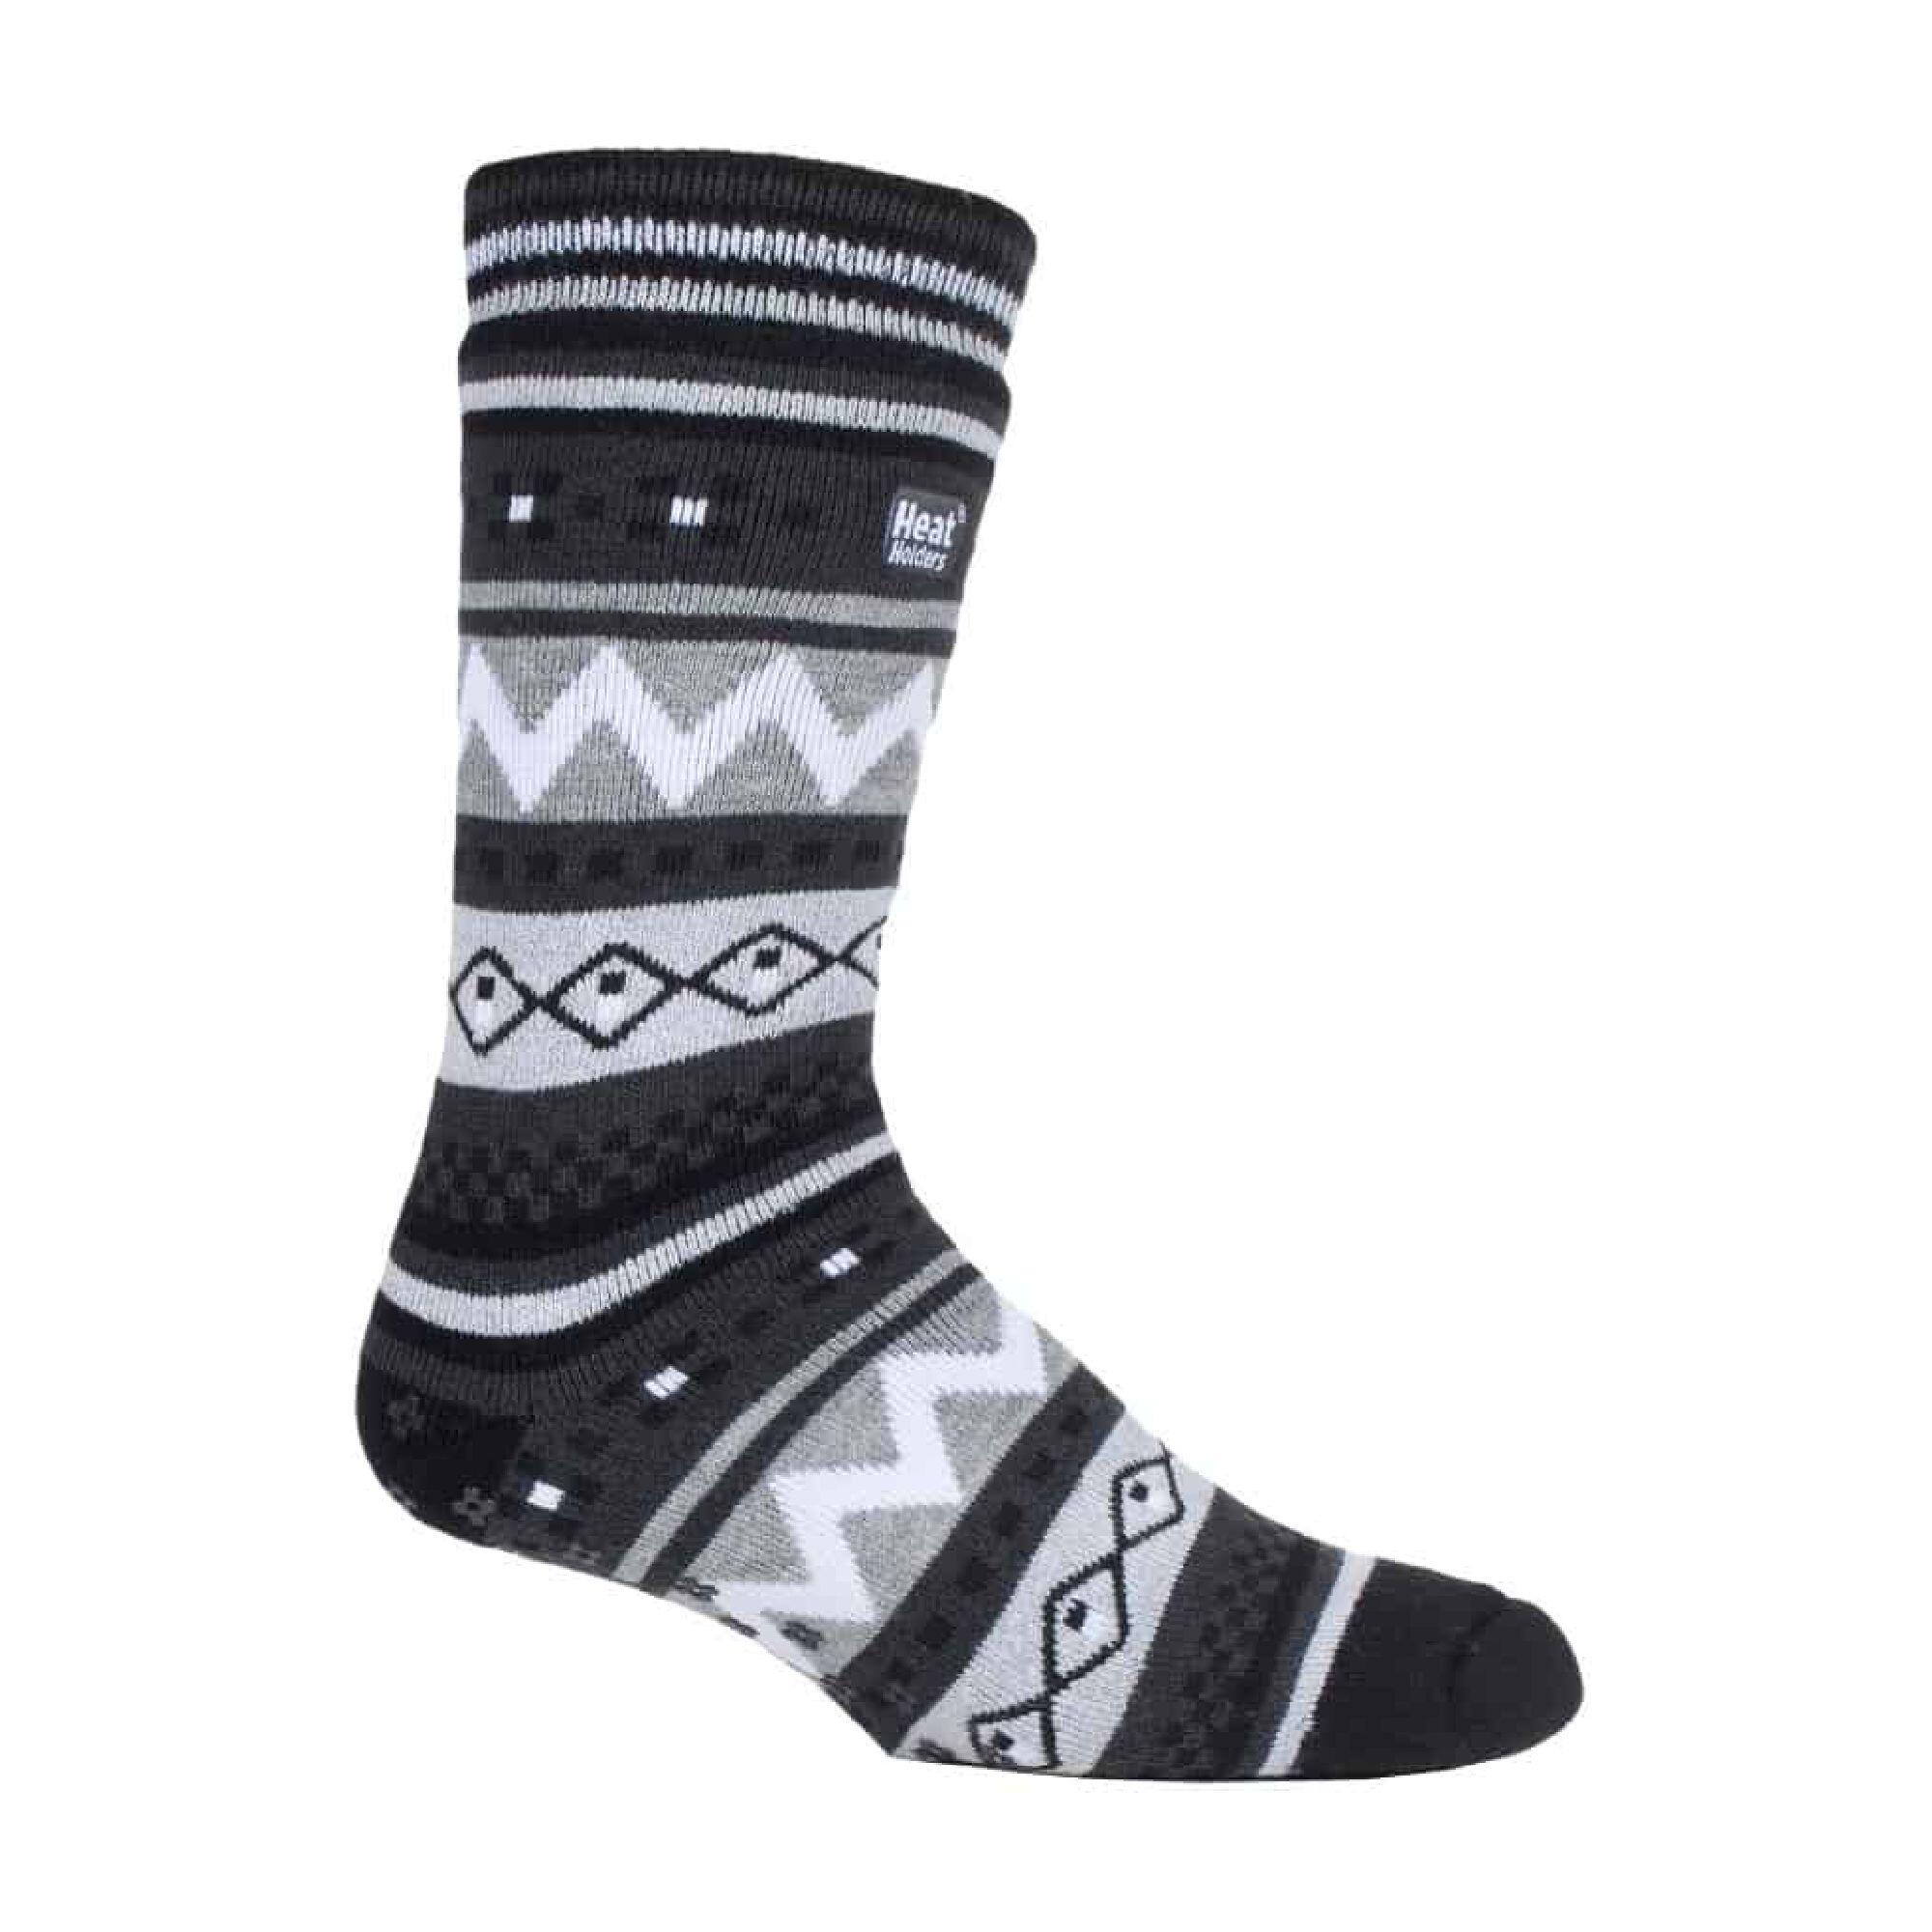 Mens Nordic Patterned Non Slip Thermal Slipper Socks with Grippers